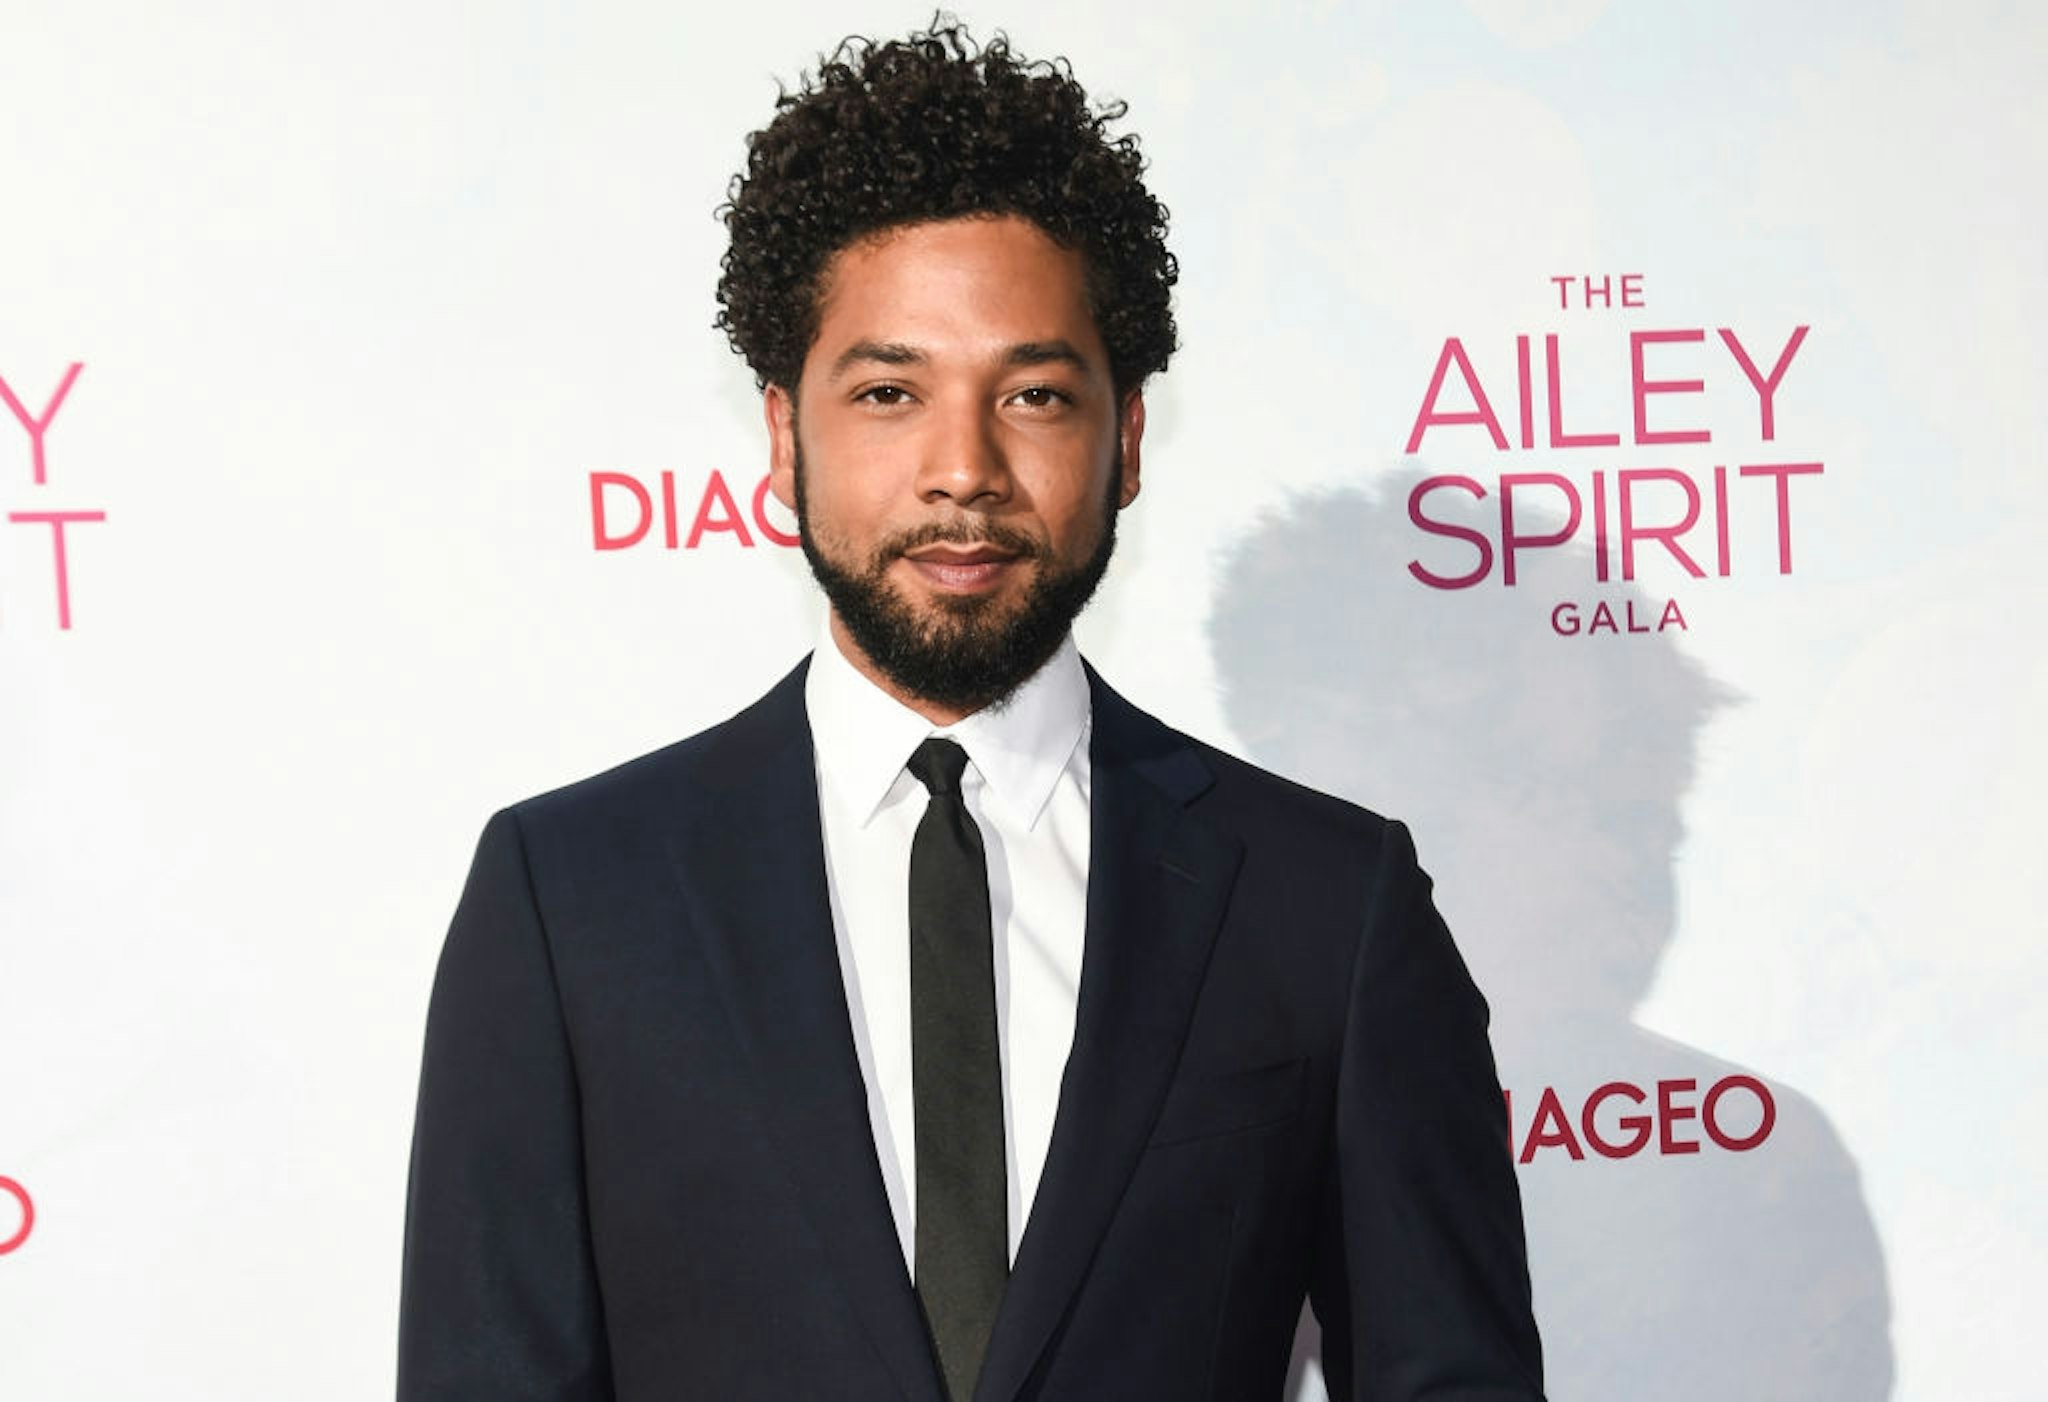 NEW YORK, NY - JUNE 14: Jussie Smollett attends the 2018 Ailey Spirit Gala Benefit at David H. Koch Theater at Lincoln Center on June 14, 2018 in New York City. (Photo by Daniel Zuchnik/Getty Images)